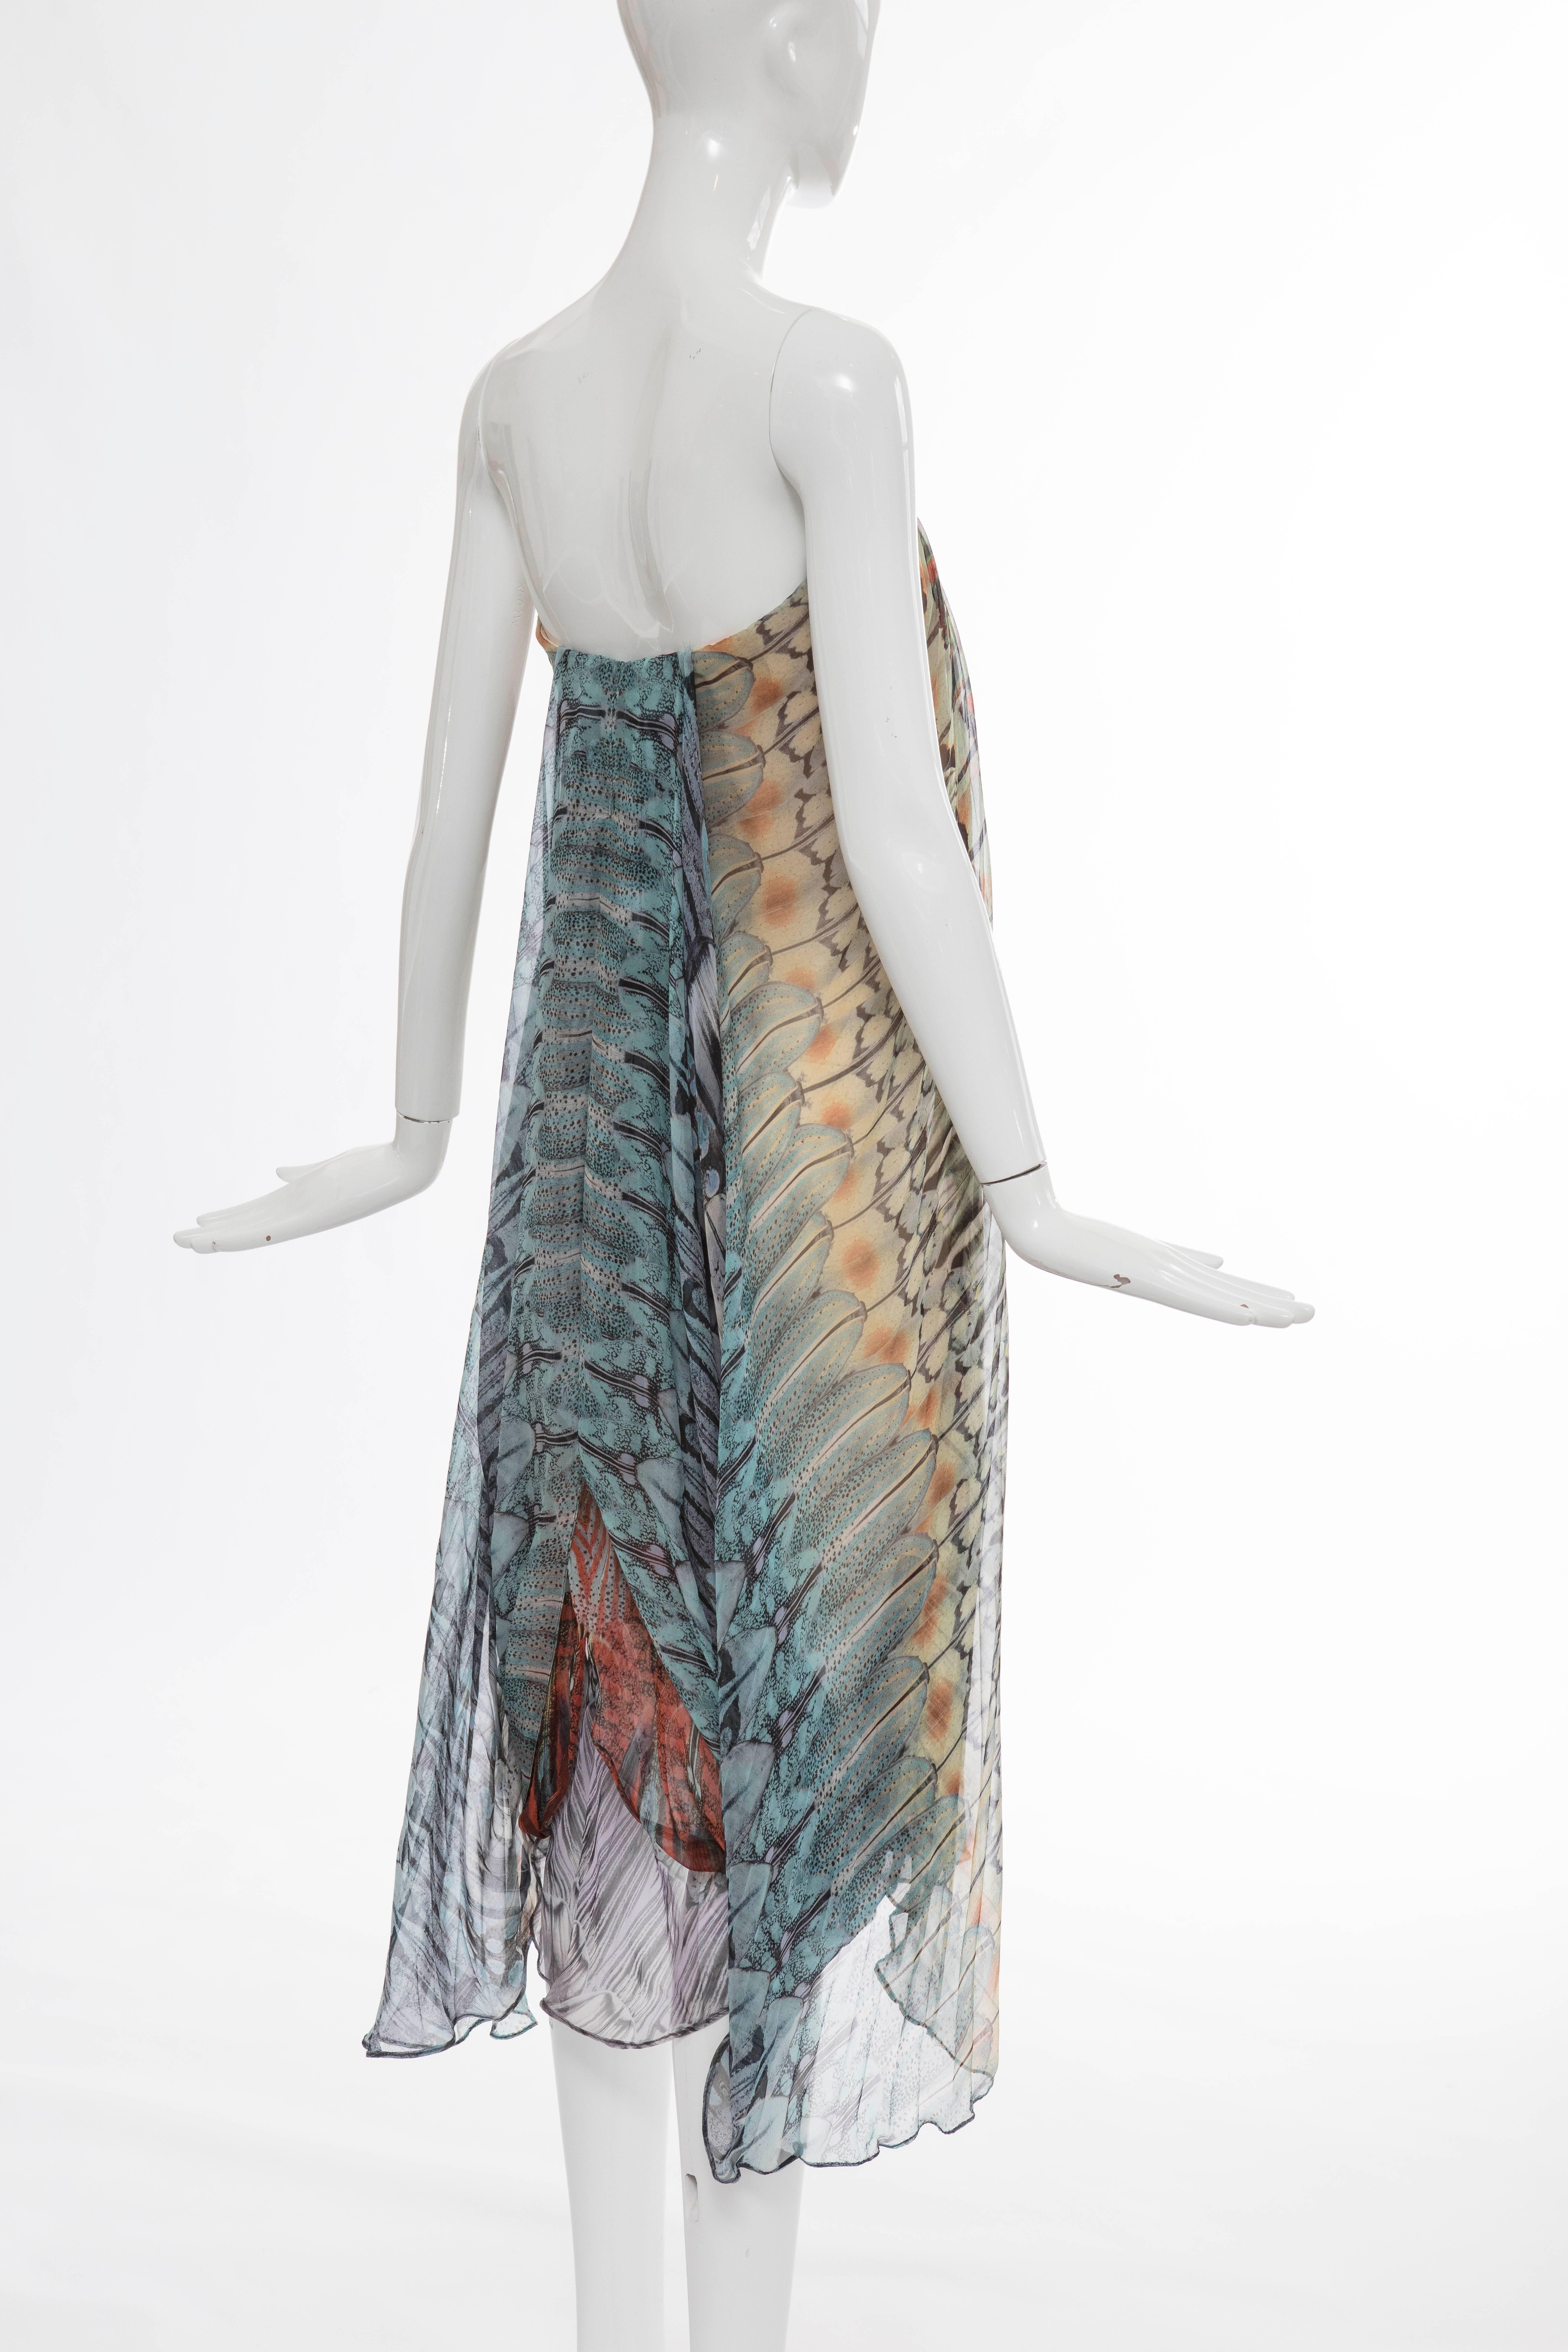 Alexander McQueen Butterfly Printed Silk Chiffon Dress, Spring - Summer 2008 In Excellent Condition For Sale In Cincinnati, OH